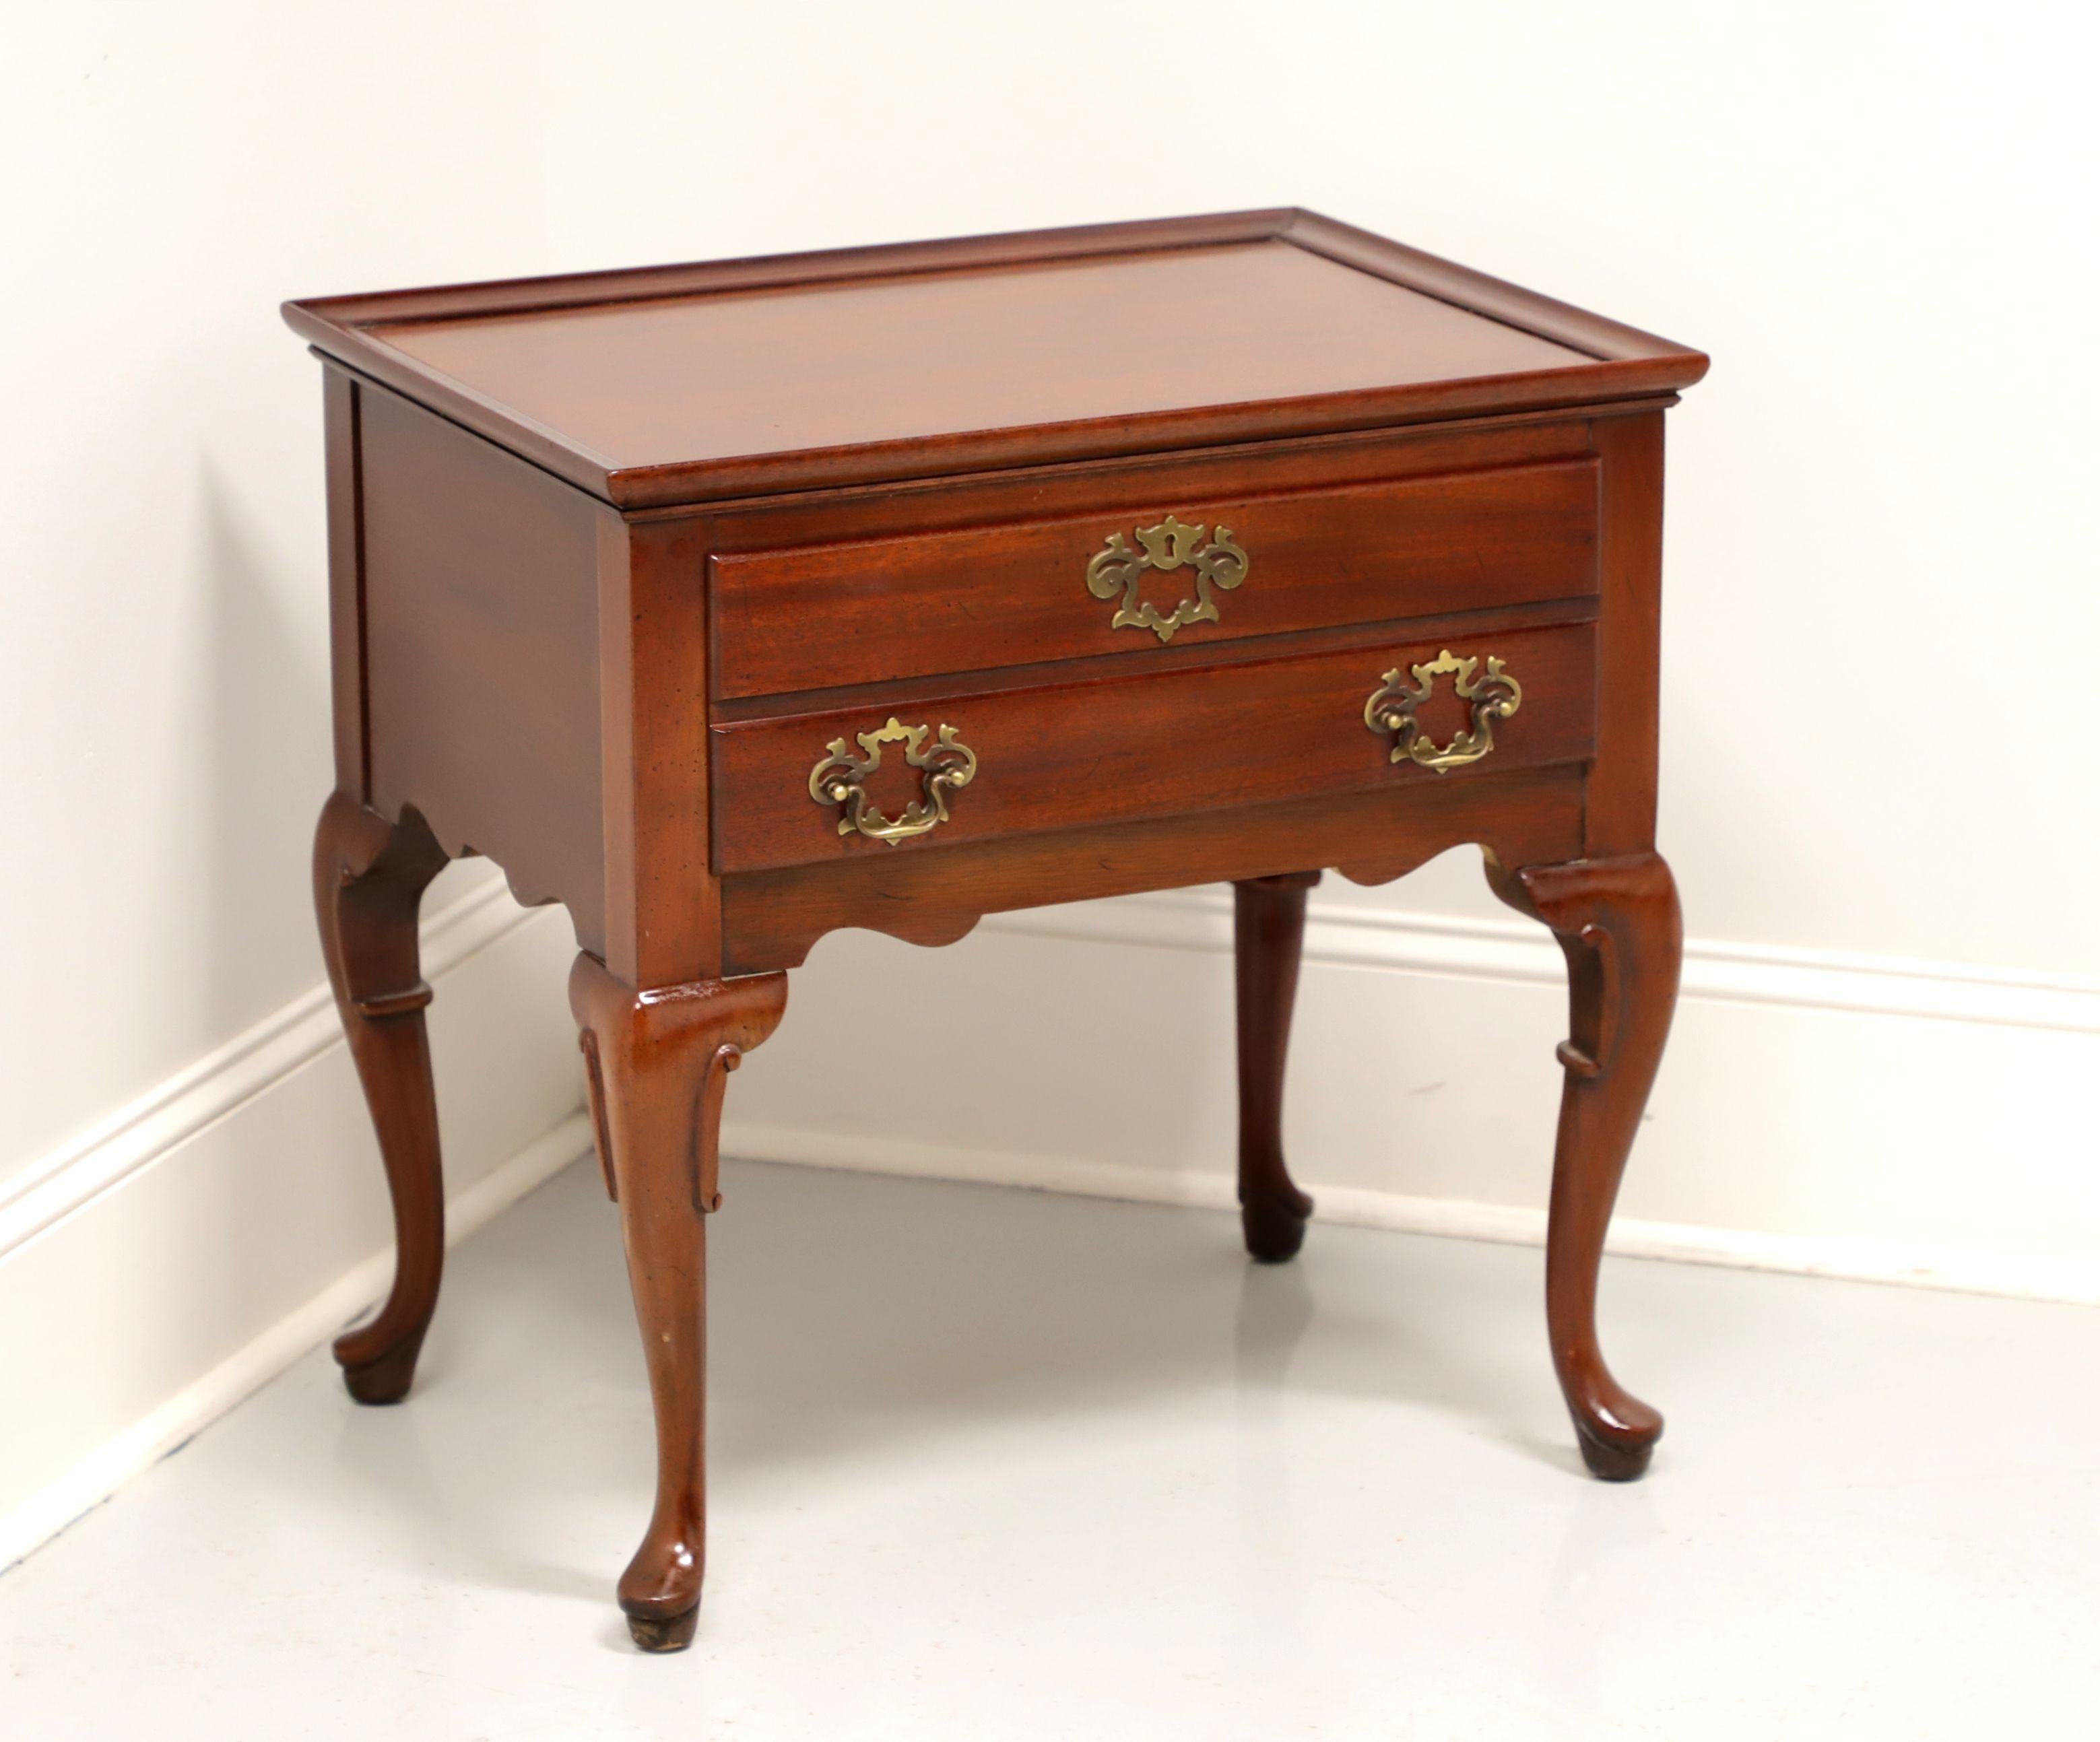 HICKORY CHAIR James River Mahogany Queen Anne Nightstand / Accent Side Table - B 5